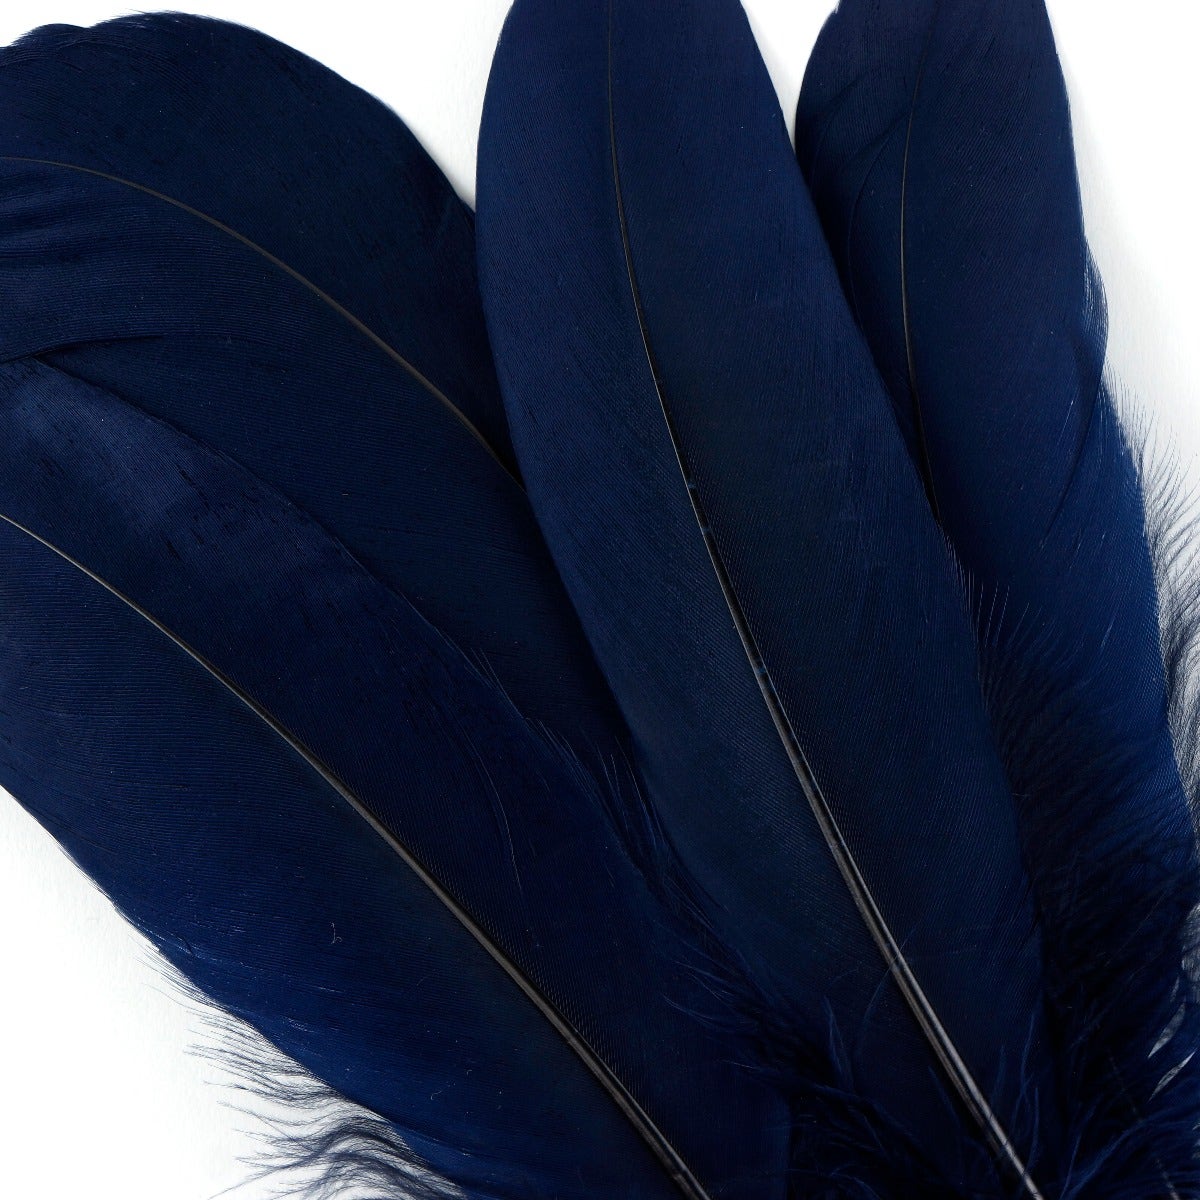 Goose Pallet Feathers 6-8" - 12 pc - Navy